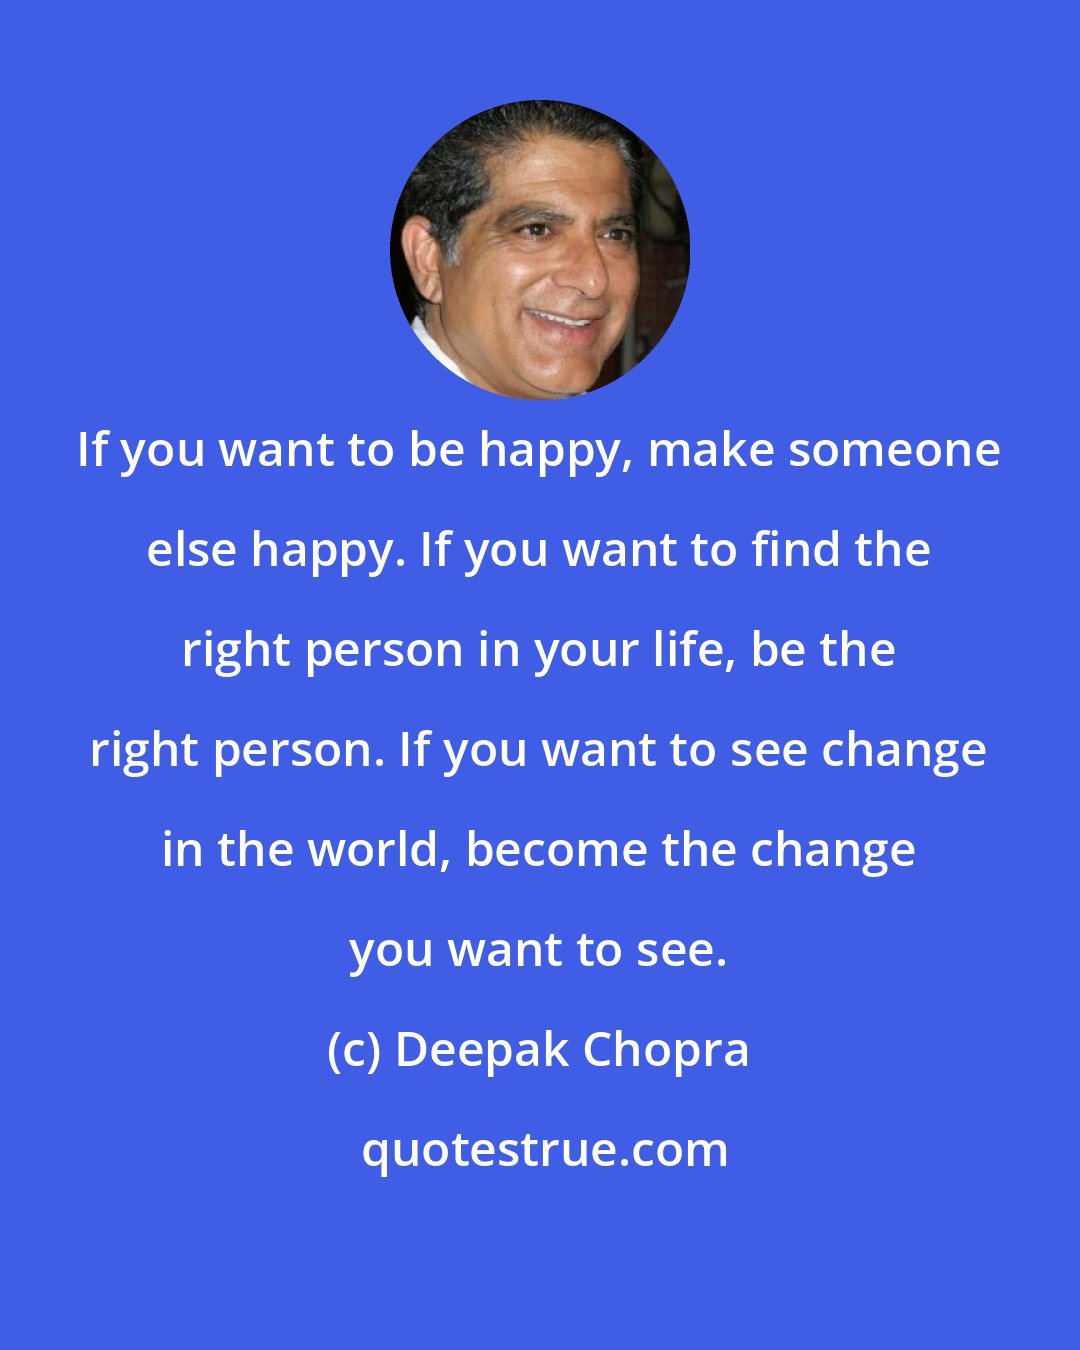 Deepak Chopra: If you want to be happy, make someone else happy. If you want to find the right person in your life, be the right person. If you want to see change in the world, become the change you want to see.